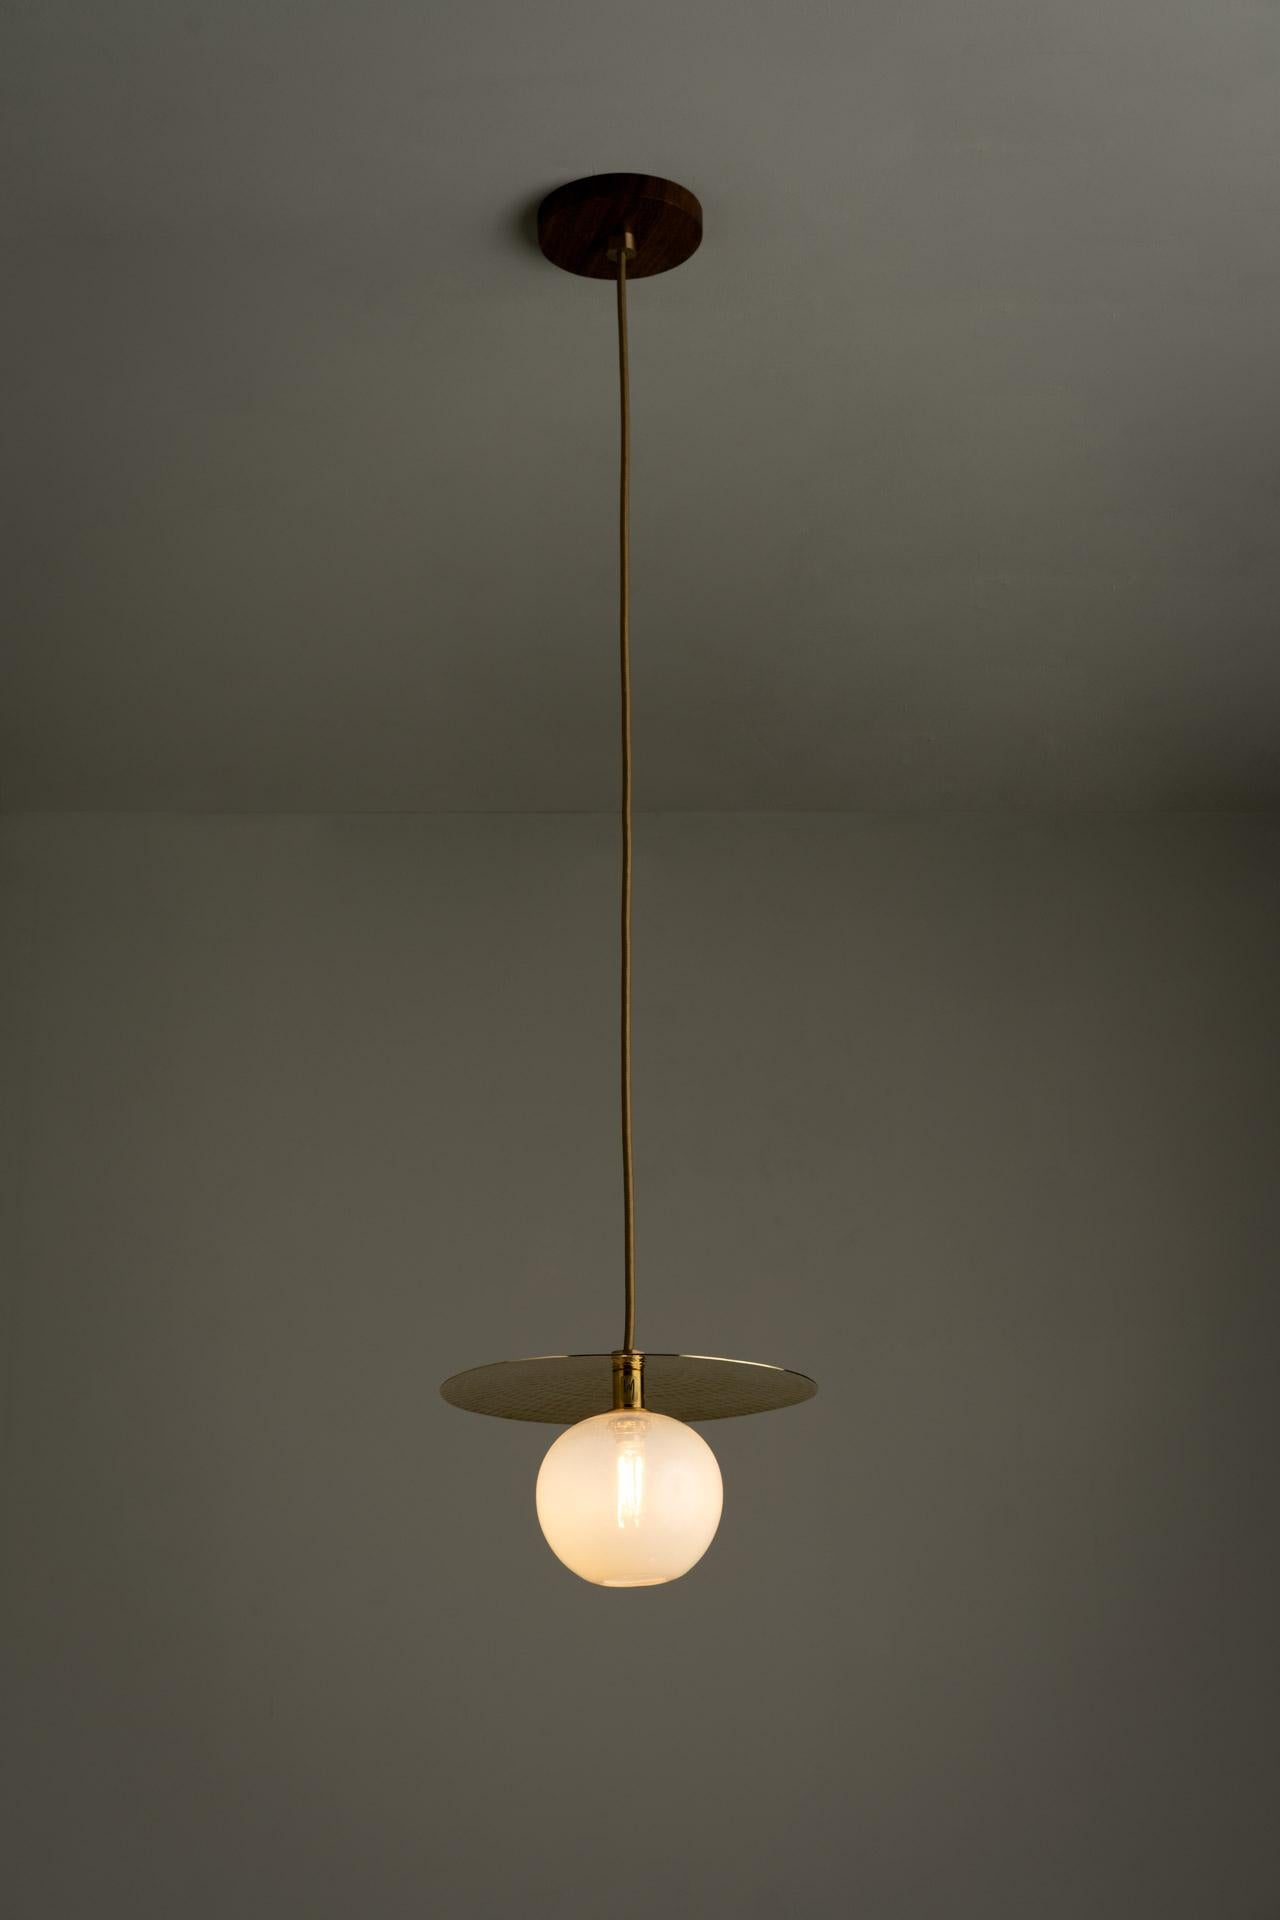 Mexican Minimalist Pendant Light Hammered Finish Glass Globe For Sale